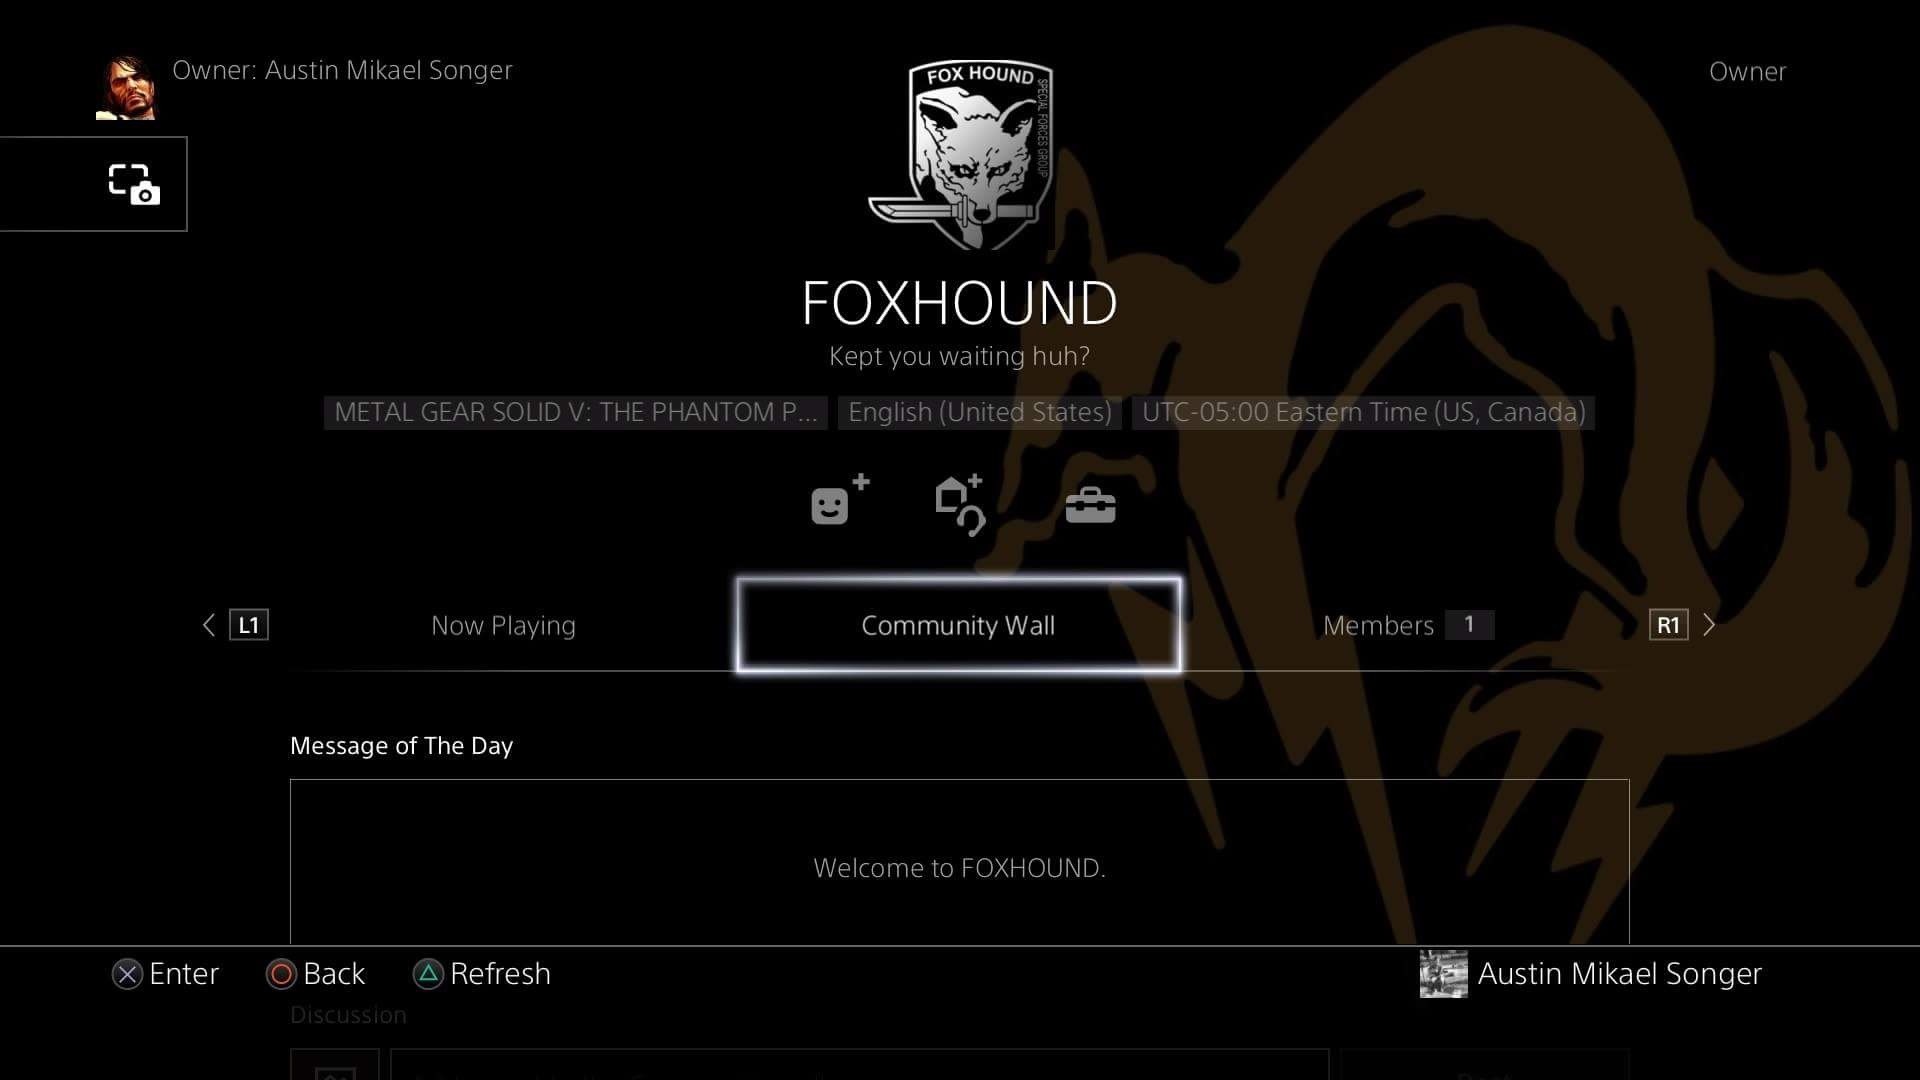 FOXHOUND PS4 Community is now live! Enlist now!